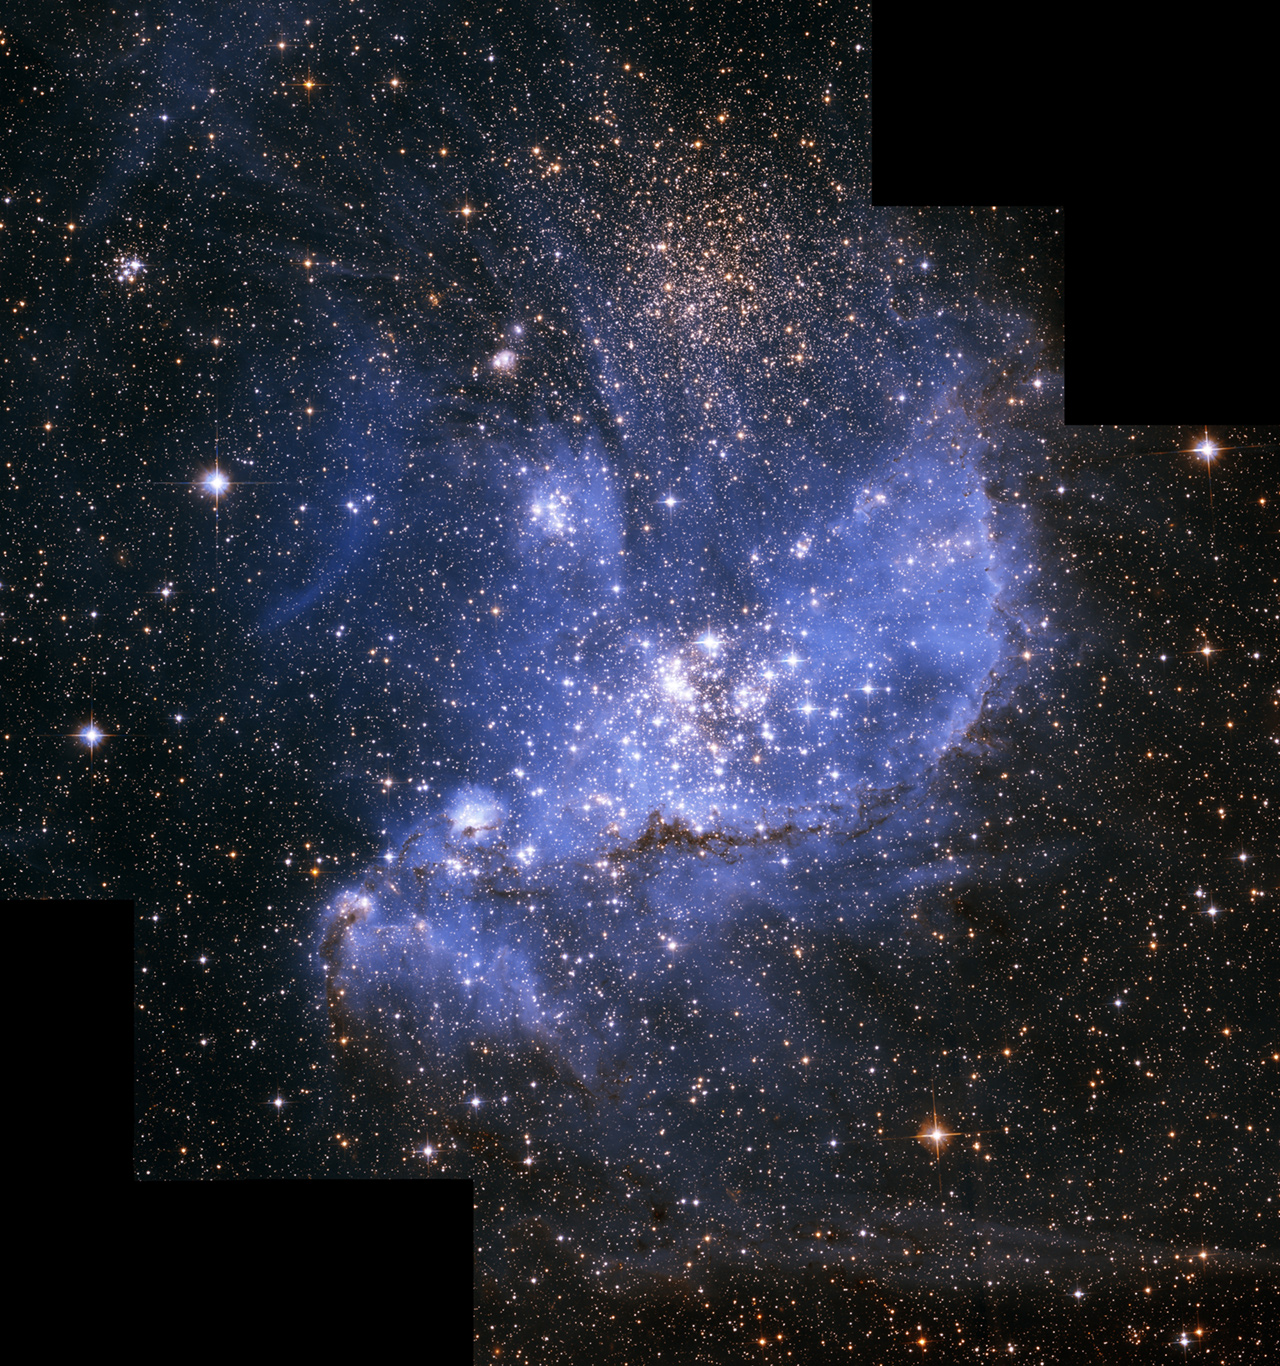 Infant stars embedded in the nebula NGC 346